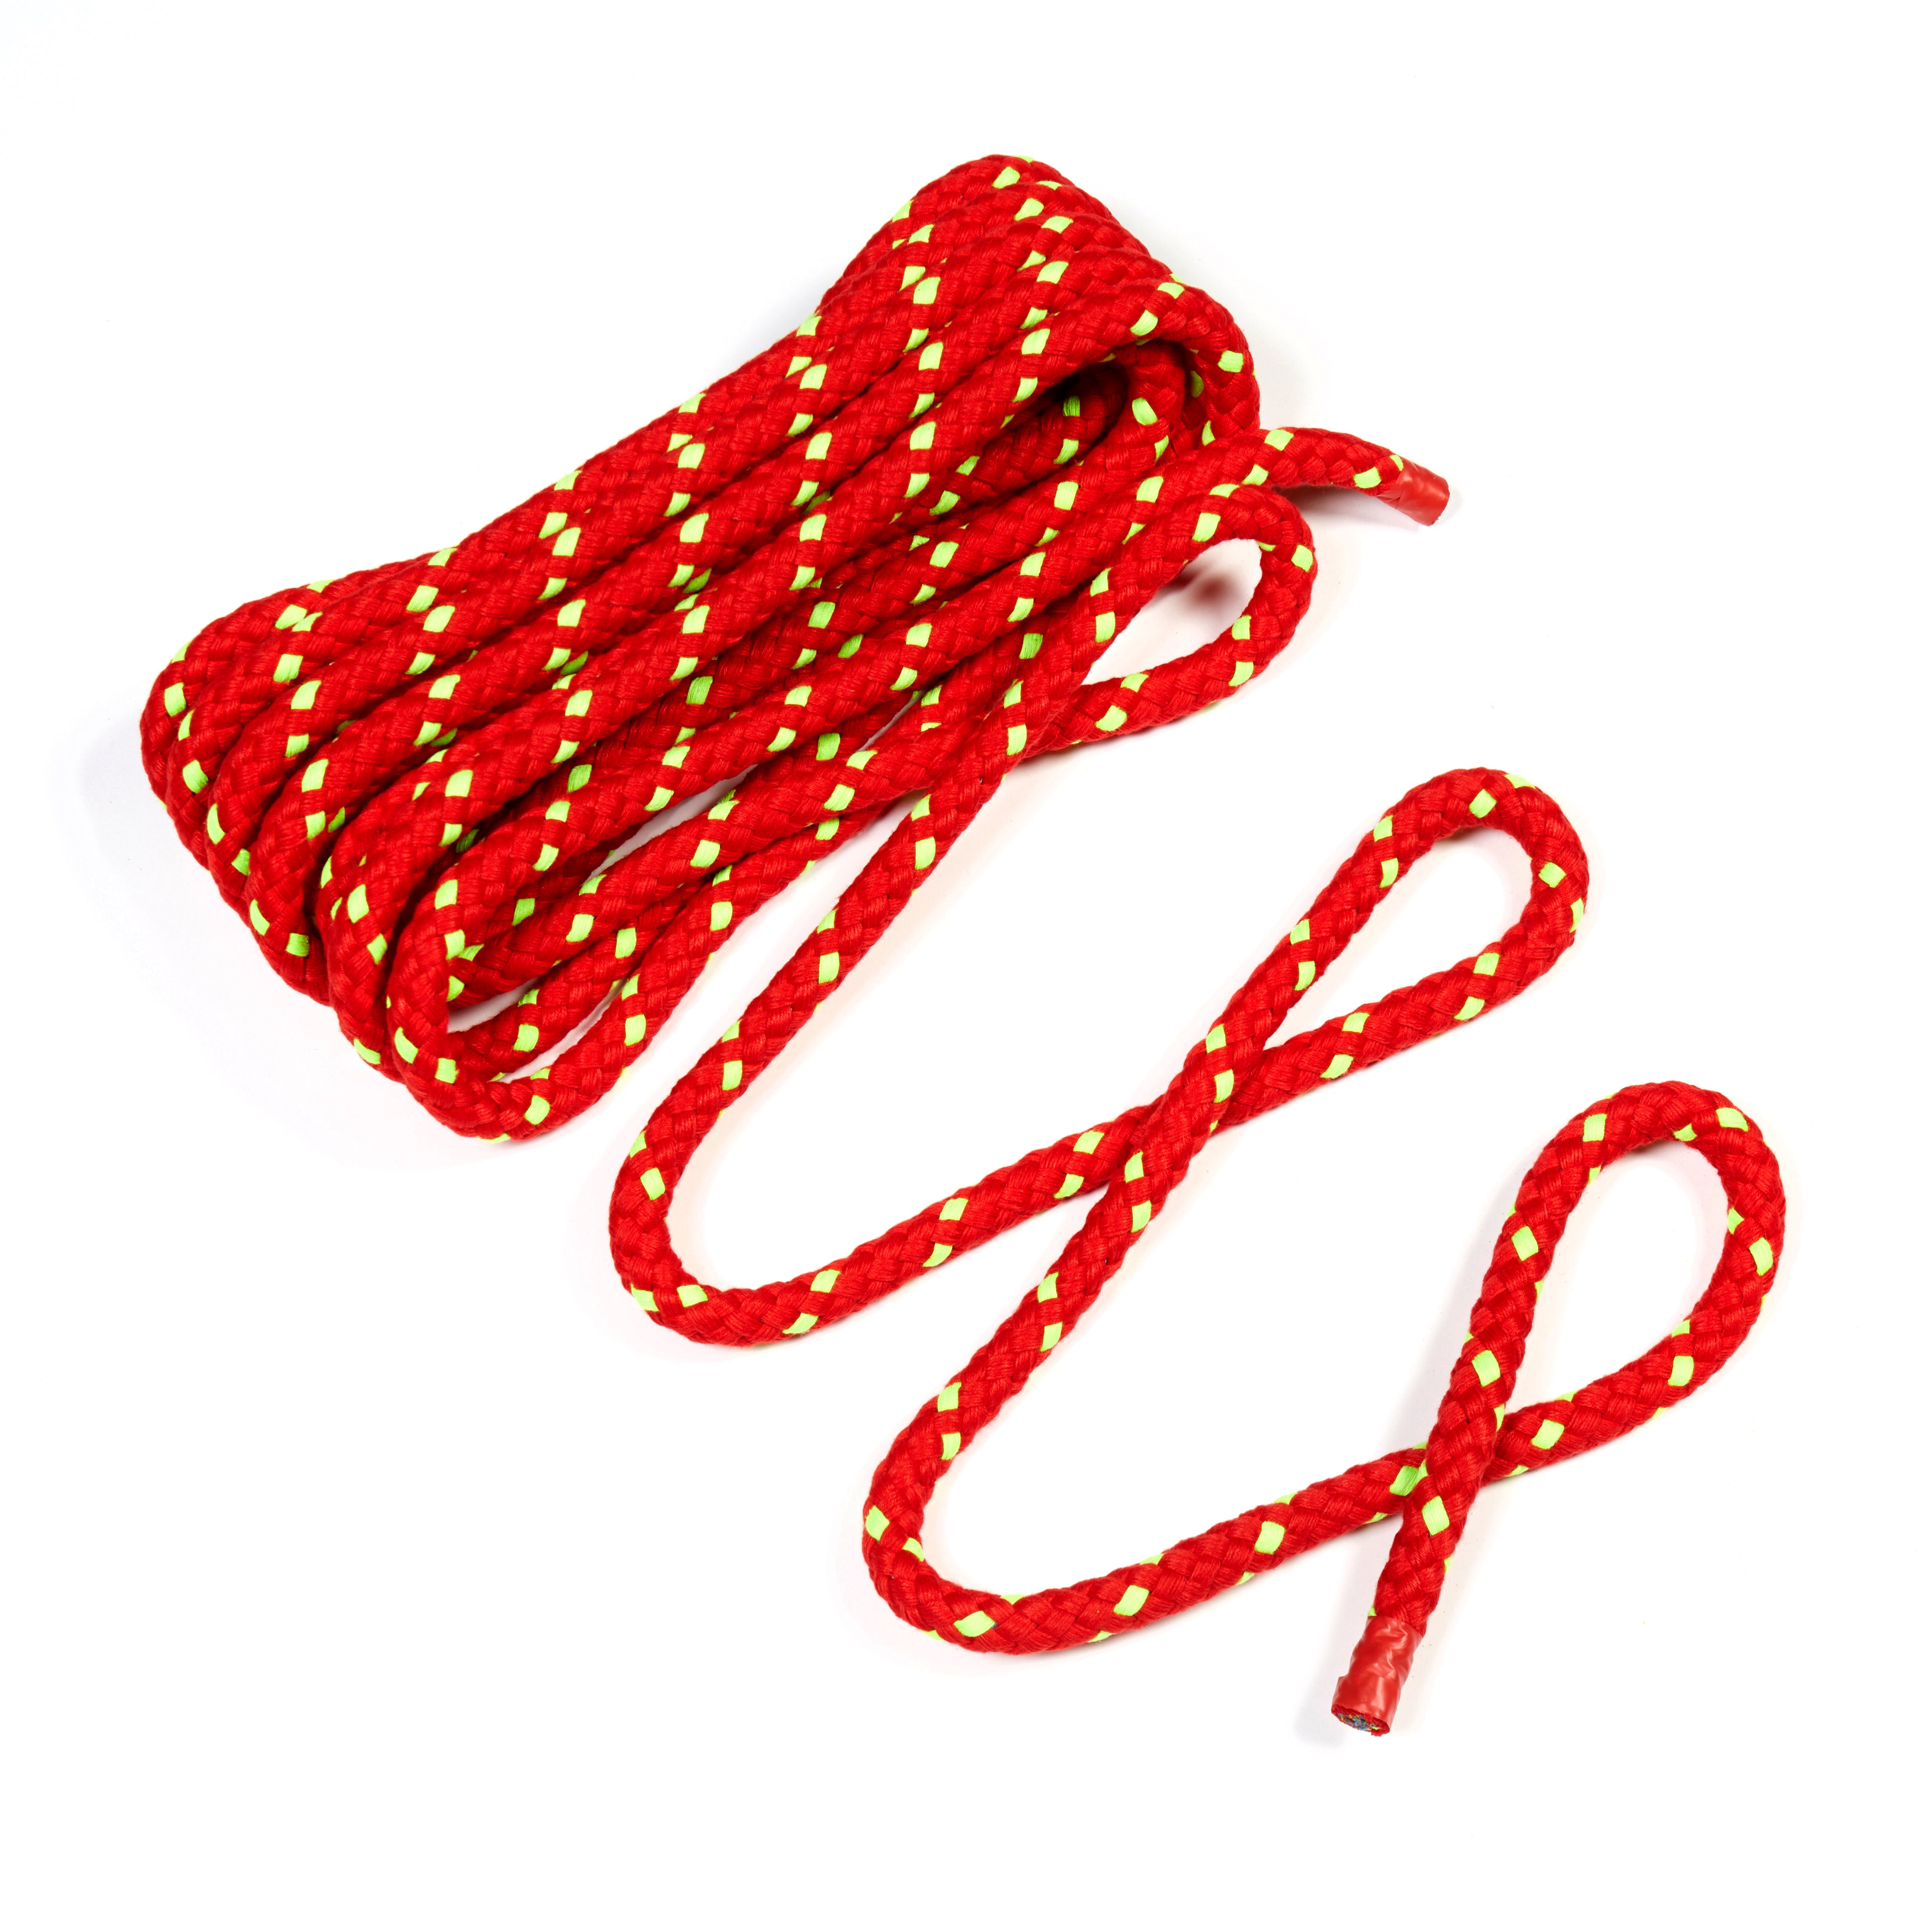 Bright red Junior Tug of War Rope, 8-braid with soft exterior, unfolded.